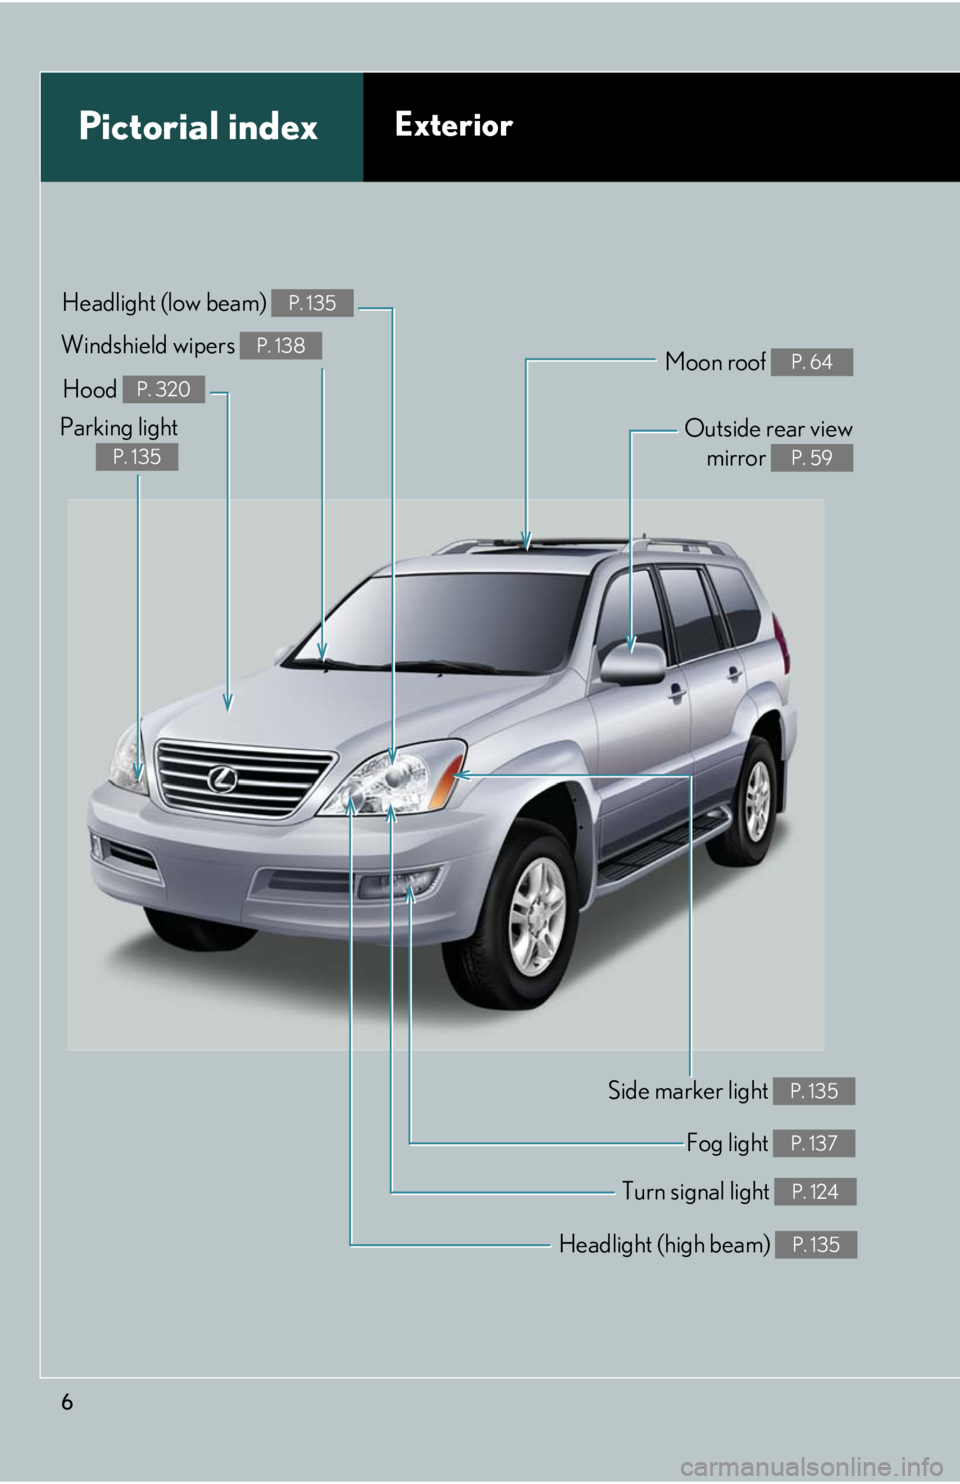 Lexus GX470 2008  Operating the lights and windshield wipers / LEXUS 2008 GX470 OWNERS MANUAL (OM60D82U) 6
Headlight (high beam) P. 135
Pictorial indexExterior
Turn signal light P. 124
Fog light P. 137
Side marker light P. 135
Headlight (low beam) P. 135
Hood P. 320
Parking light
P. 135
Windshield wipers